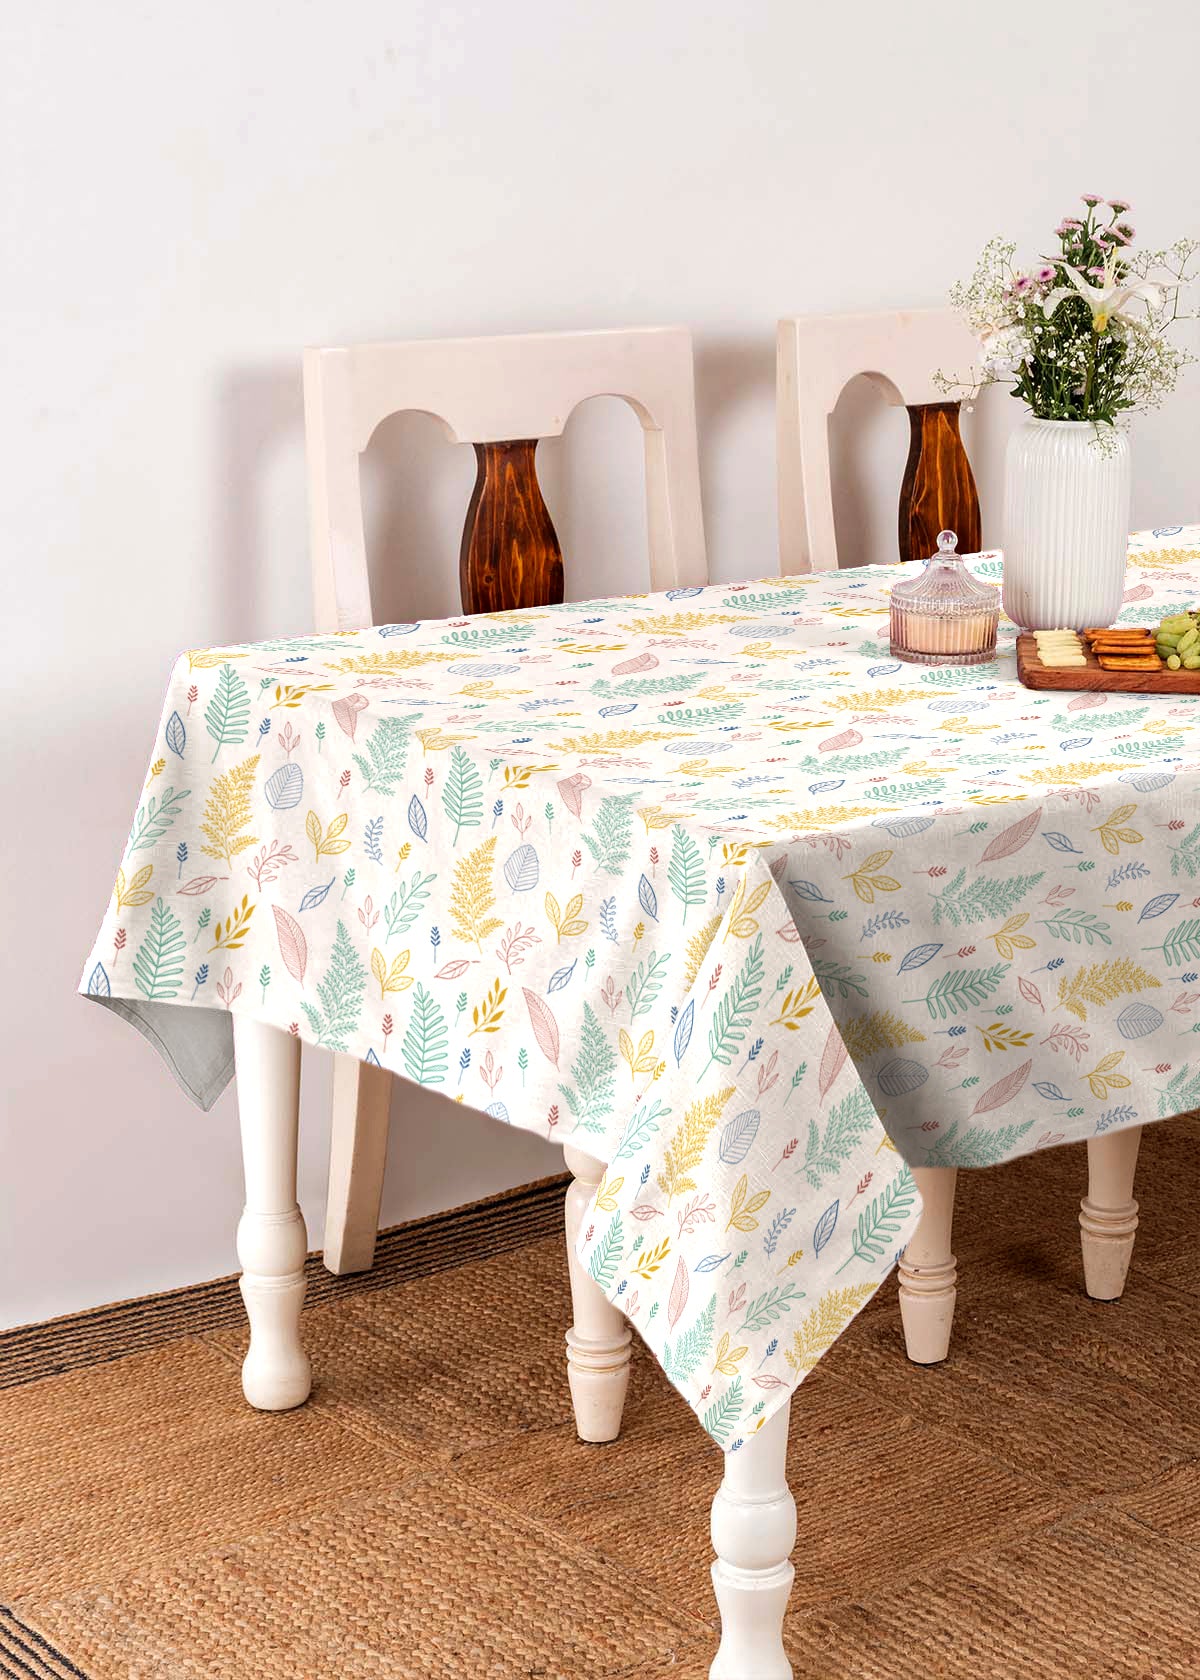 Rustling Leaves in Many hues Printed Cotton Table Cloth - Multicolor